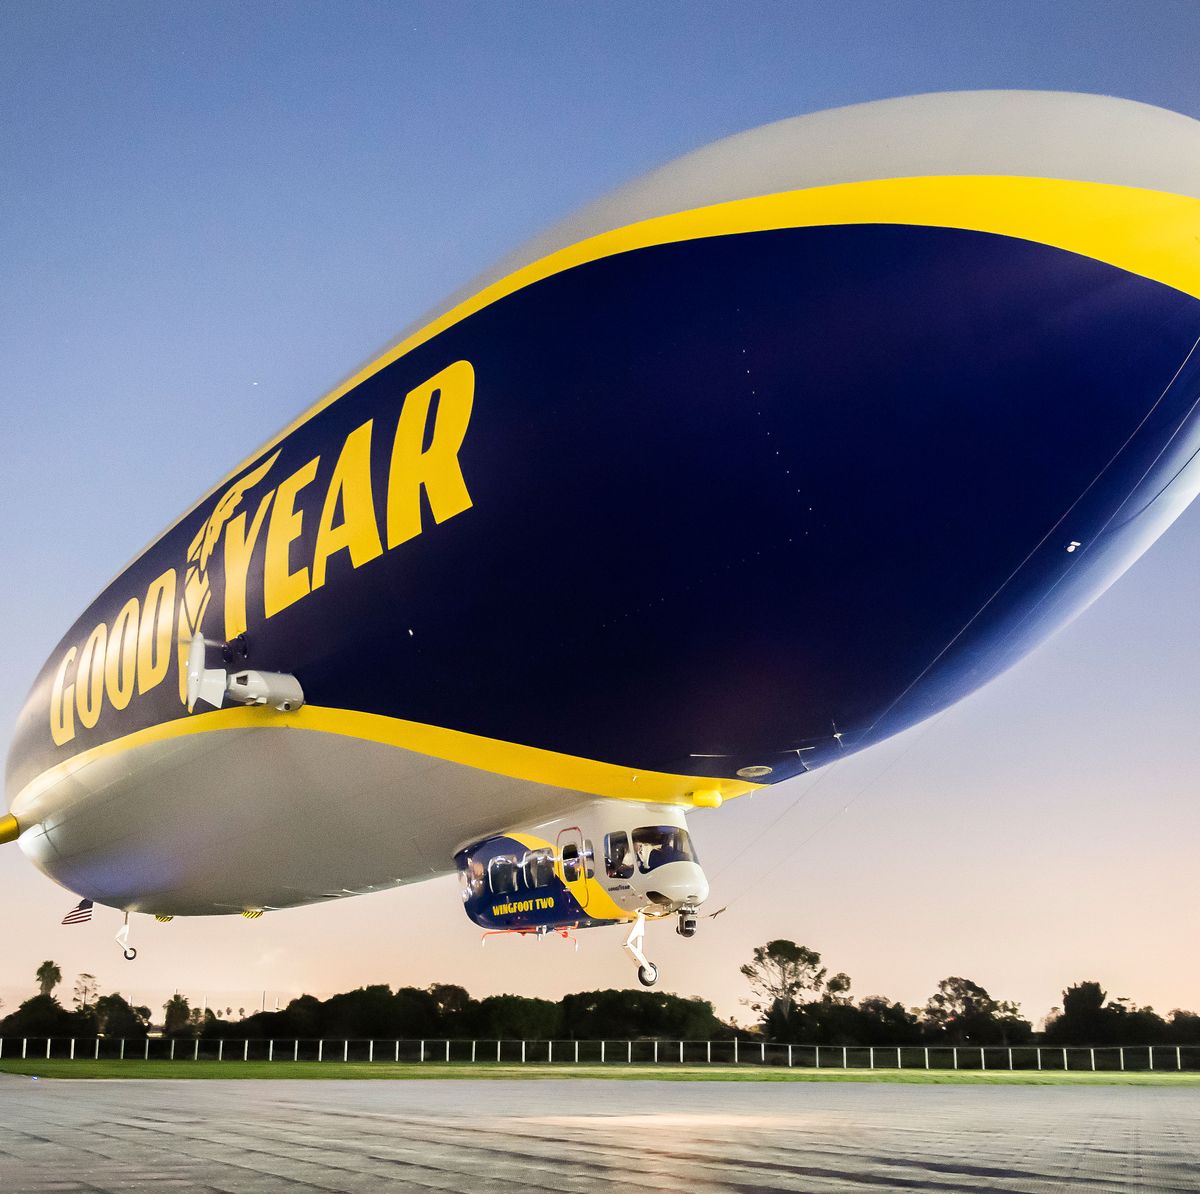 Move over Goodyear blimp, the Zeppelin NT is coming to Carson